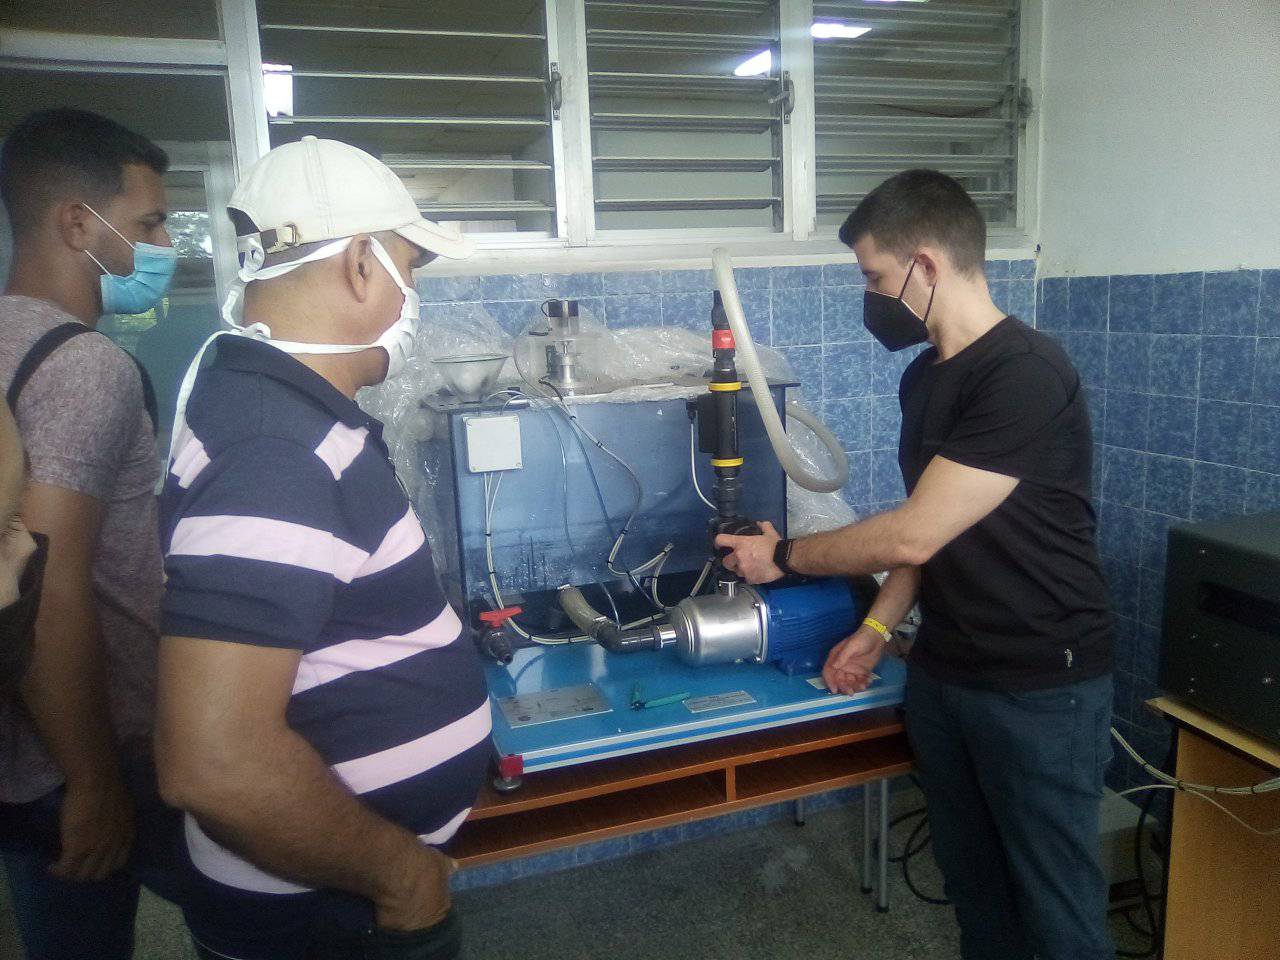 Universidad de Las Tunas completed the assembly of equipment for renewable energy laboratories